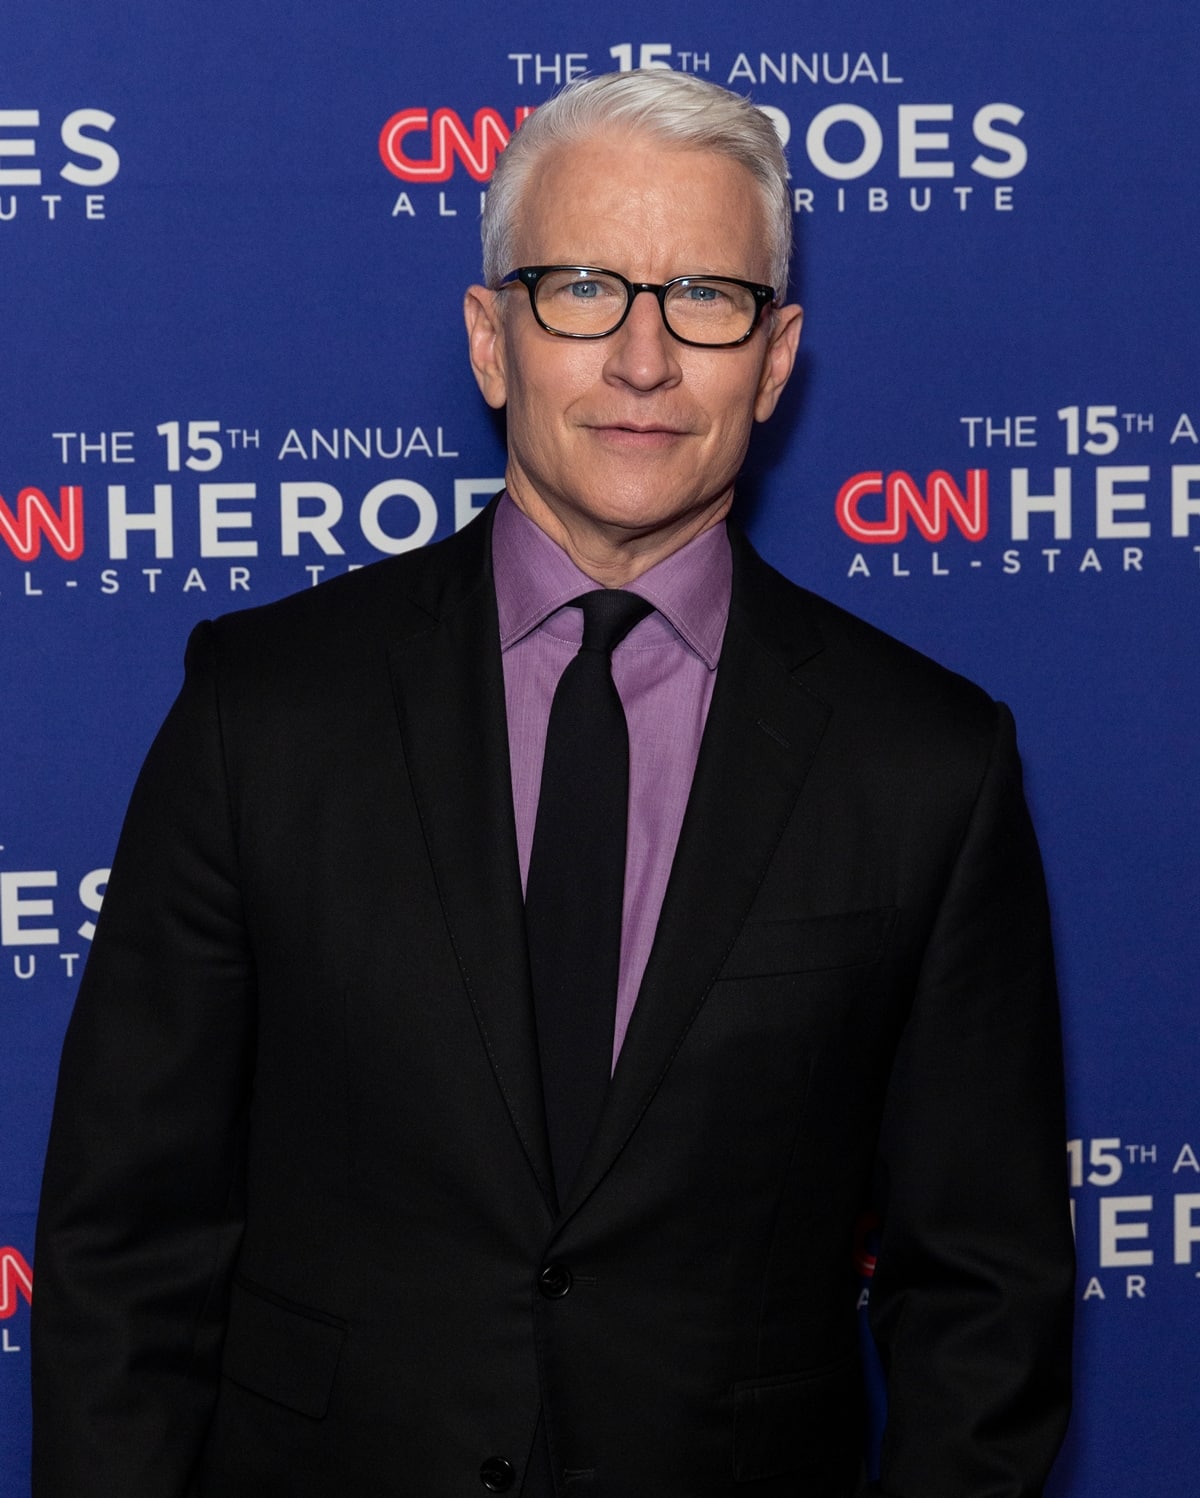 Anderson Cooper makes a salary of $12 million a year from CNN and has an estimated net worth of $200 million